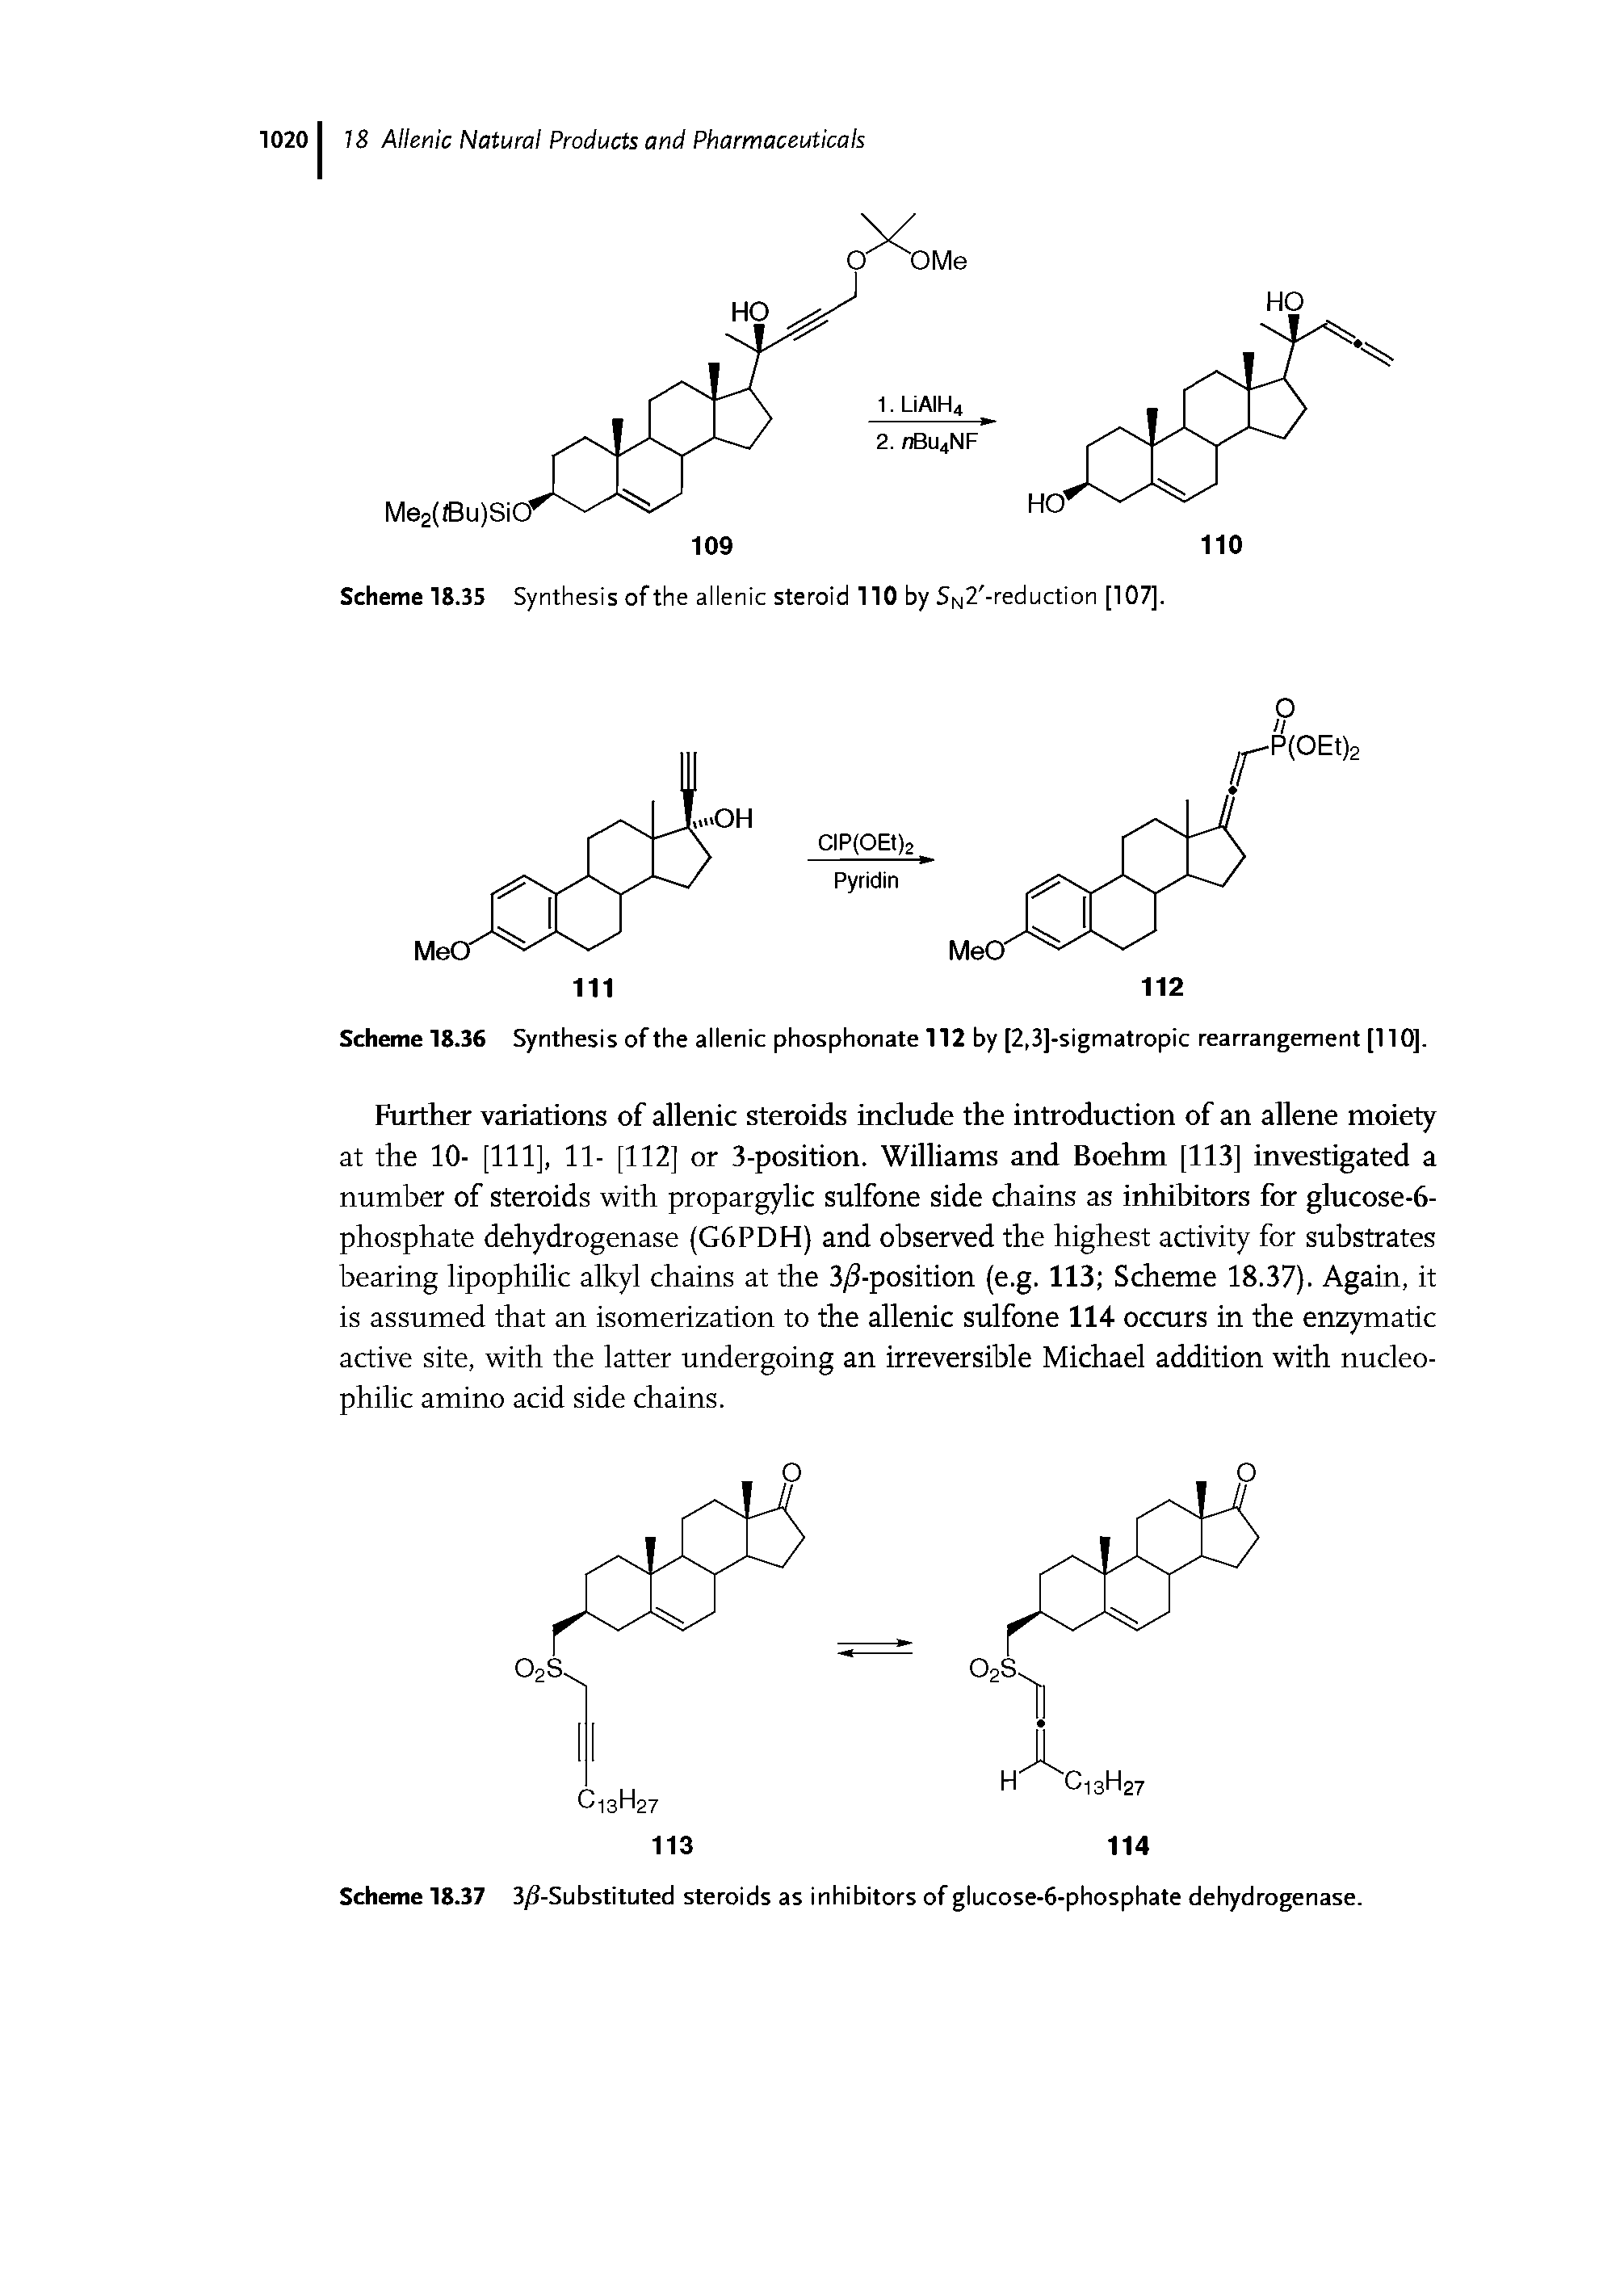 Scheme 18.36 Synthesis of the allenic phosphonate 112 by [2,3]-sigmatropic rearrangement [110].